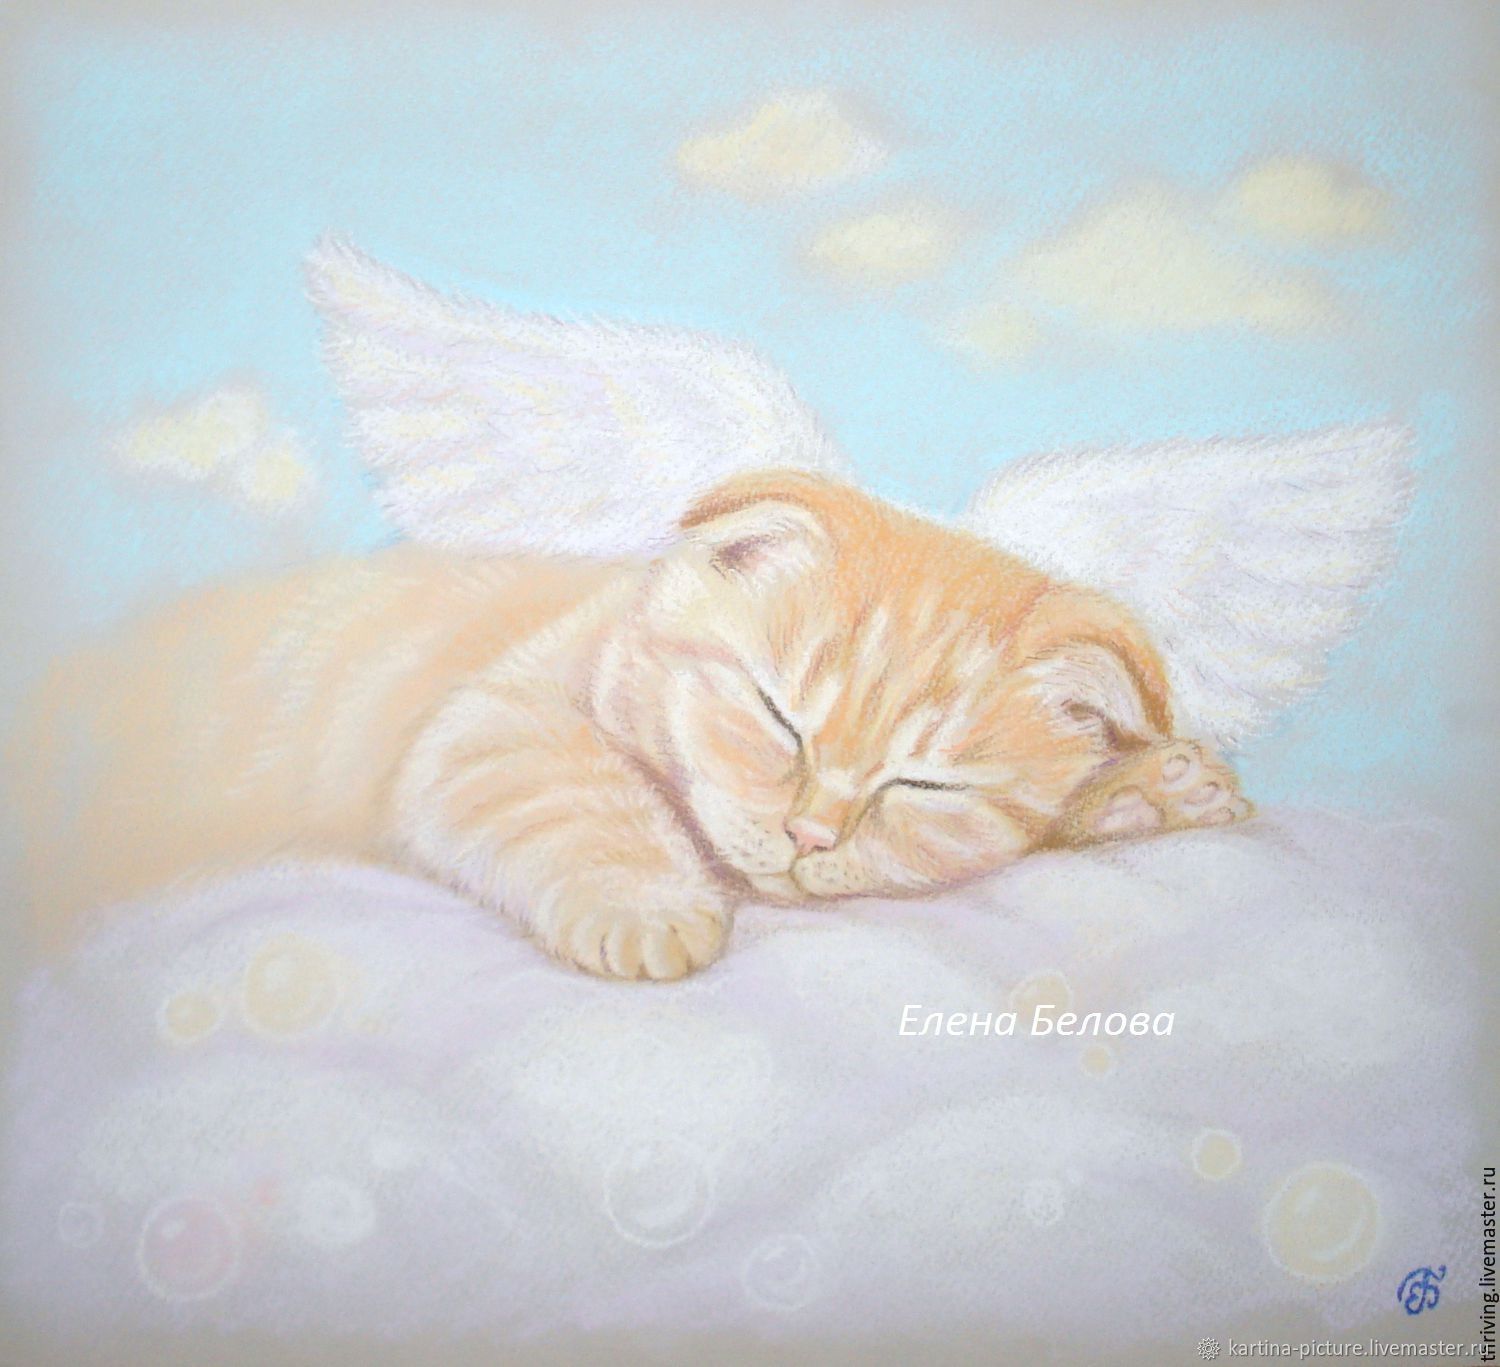 Cute angel figurine from Ukraine angel on a cloud with a cat